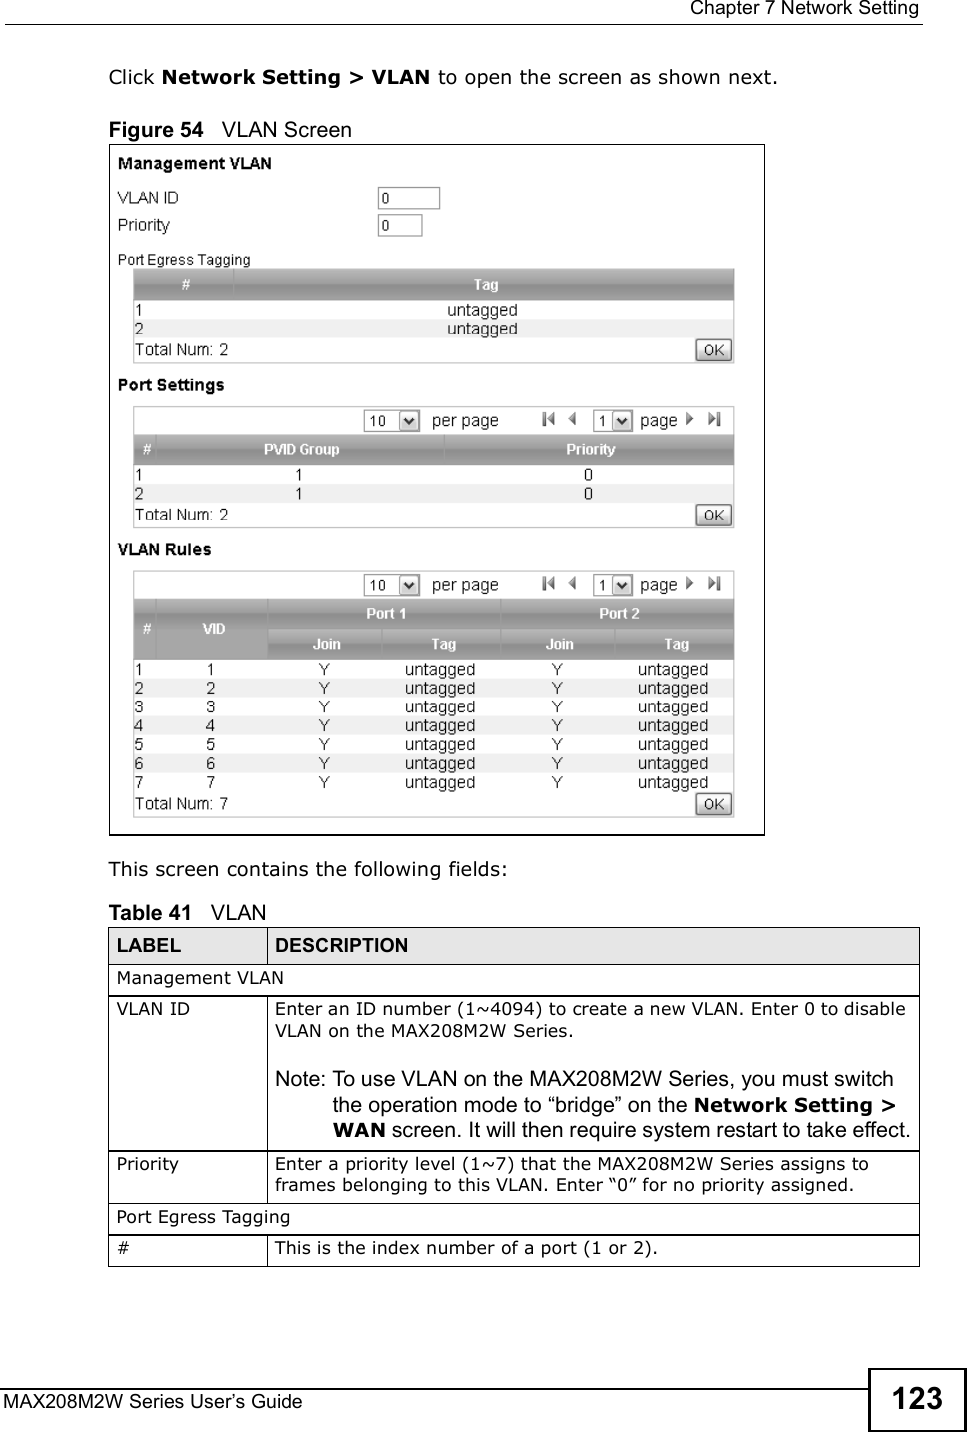  Chapter 7Network SettingMAX208M2W Series User s Guide 123Click Network Setting &gt; VLAN to open the screen as shown next.Figure 54   VLAN ScreenThis screen contains the following fields:Table 41   VLANLABEL DESCRIPTIONManagement VLANVLAN IDEnter an ID number (1~4094) to create a new VLAN. Enter 0 to disable VLAN on the MAX208M2W Series.Note: To use VLAN on the MAX208M2W Series, you must switch the operation mode to !bridge&quot; on the Network Setting &gt; WAN screen. It will then require system restart to take effect.PriorityEnter a priority level (1~7) that the MAX208M2W Series assigns to frames belonging to this VLAN. Enter &quot;0# for no priority assigned.Port Egress Tagging#This is the index number of a port (1 or 2).